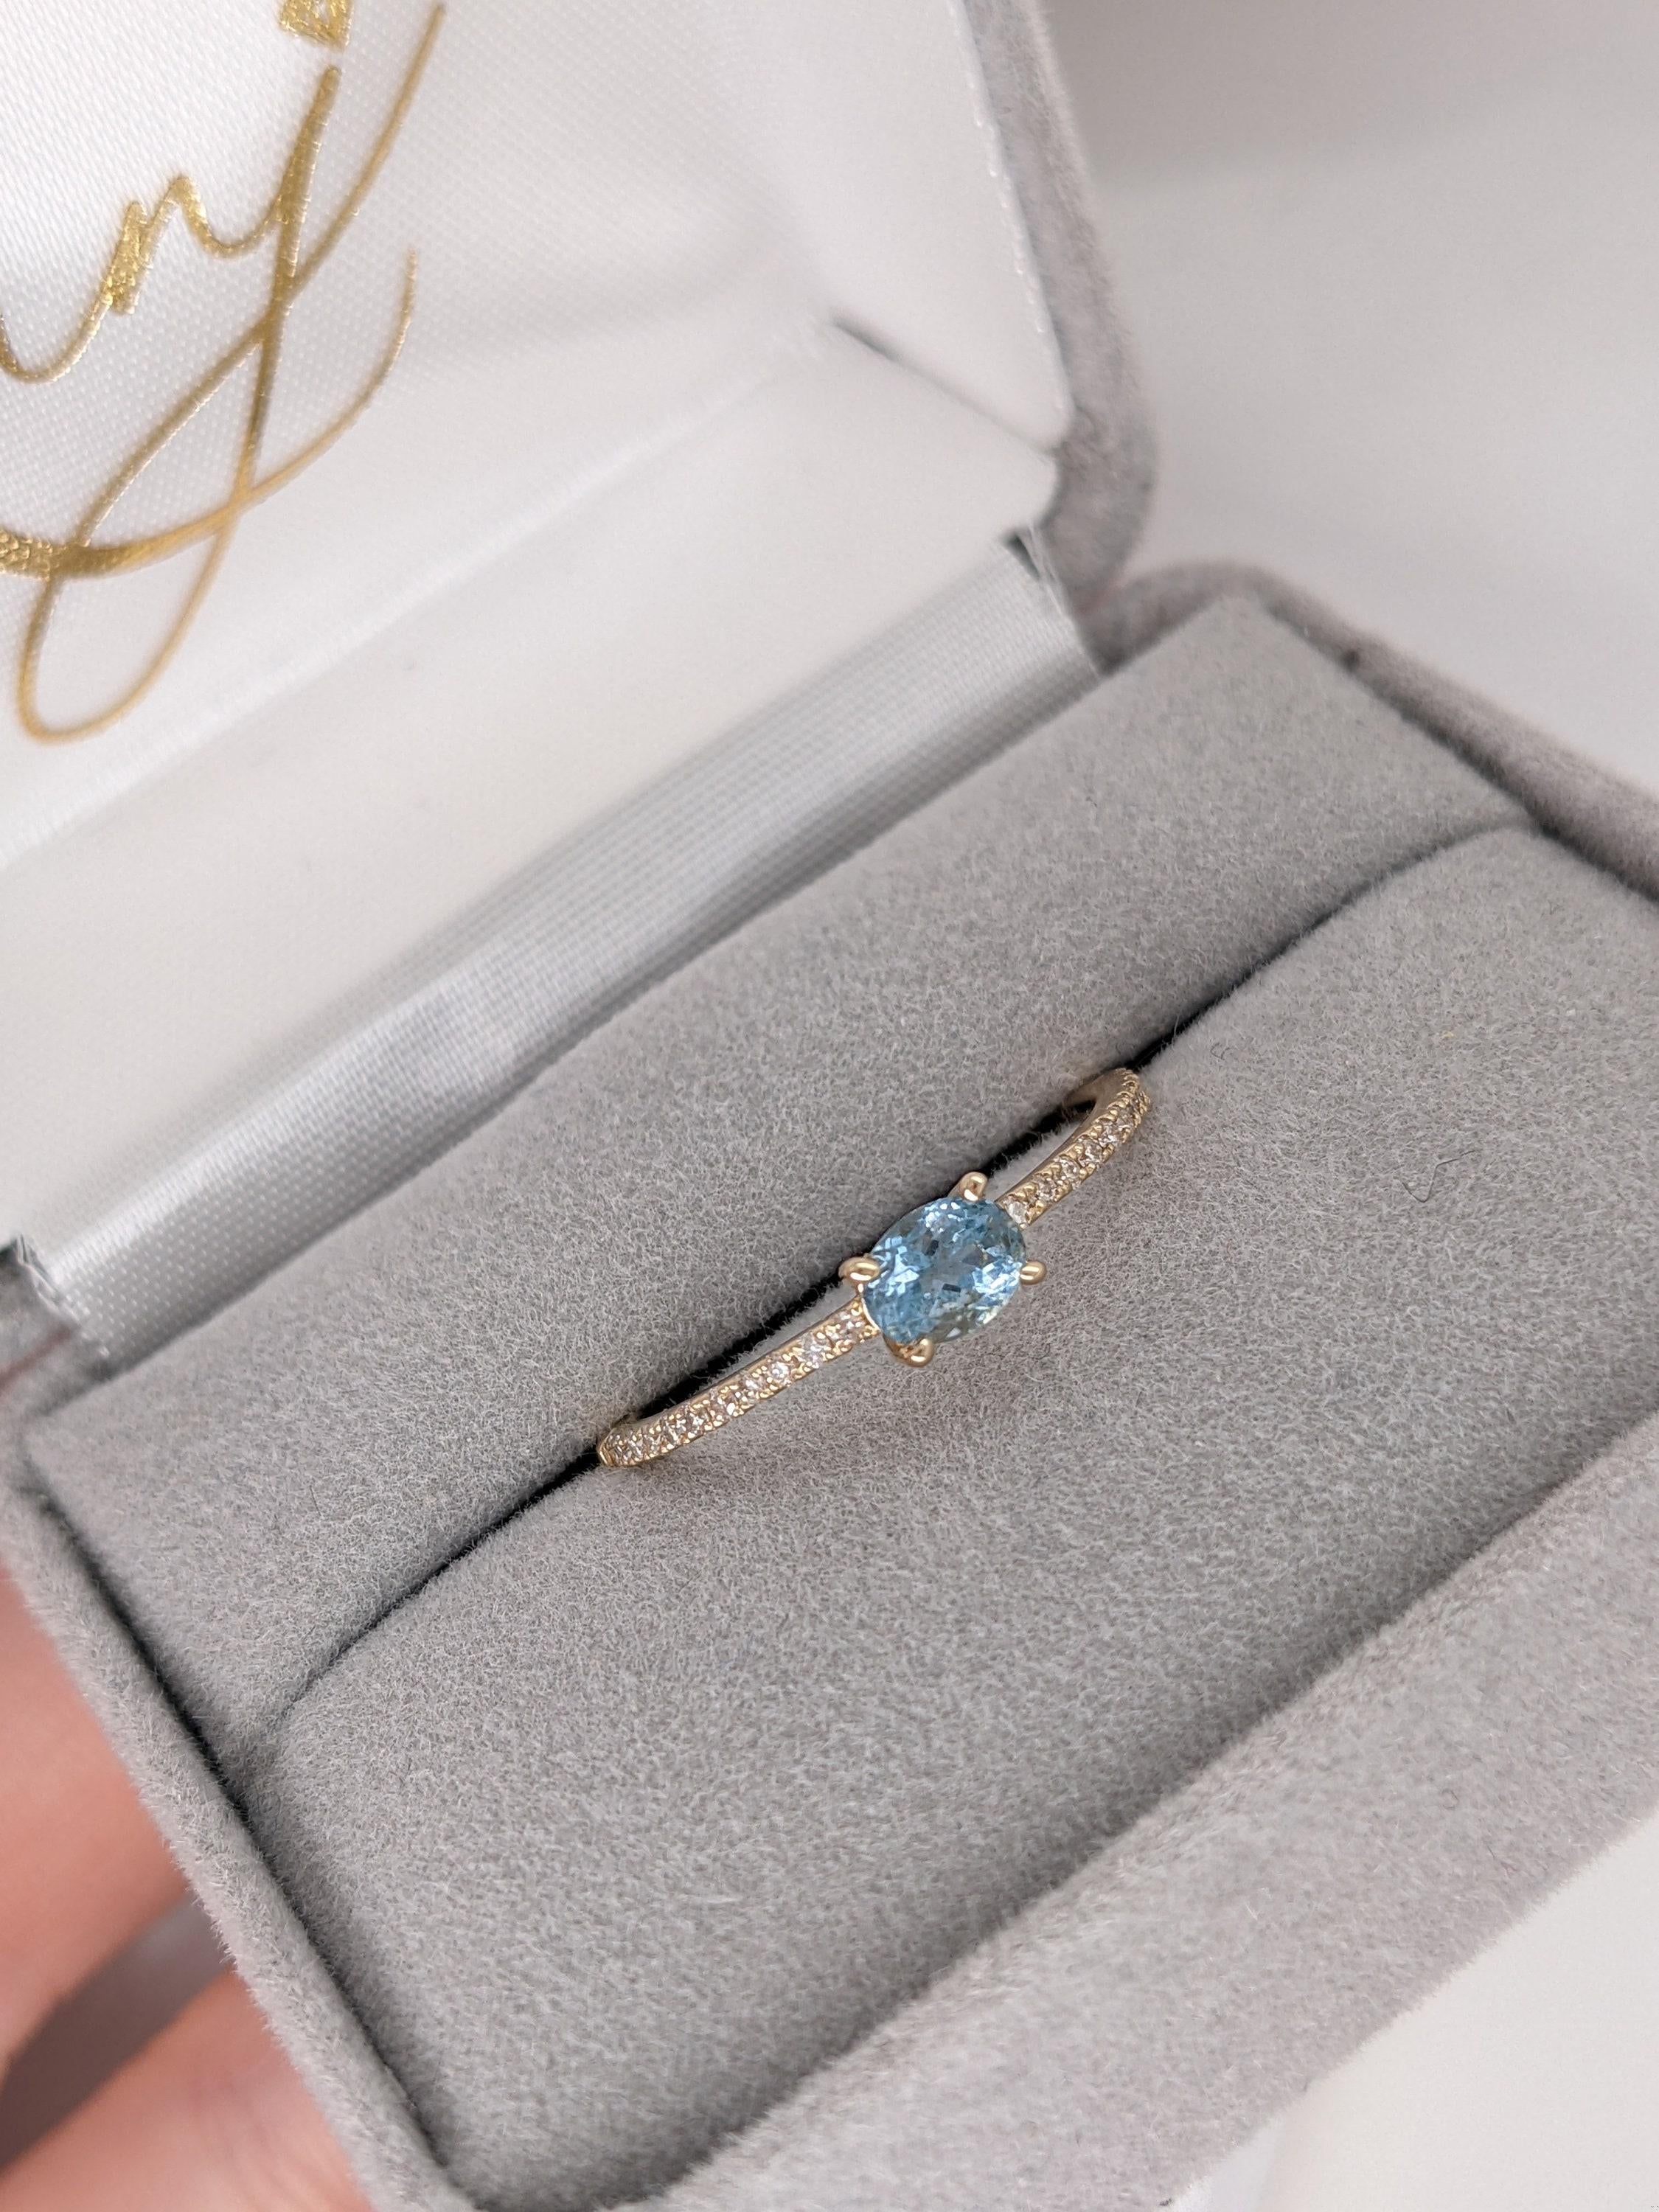 East West Aquamarine Ring w Earth Mined Diamonds in Solid 14k Yellow Gold OV 4x3